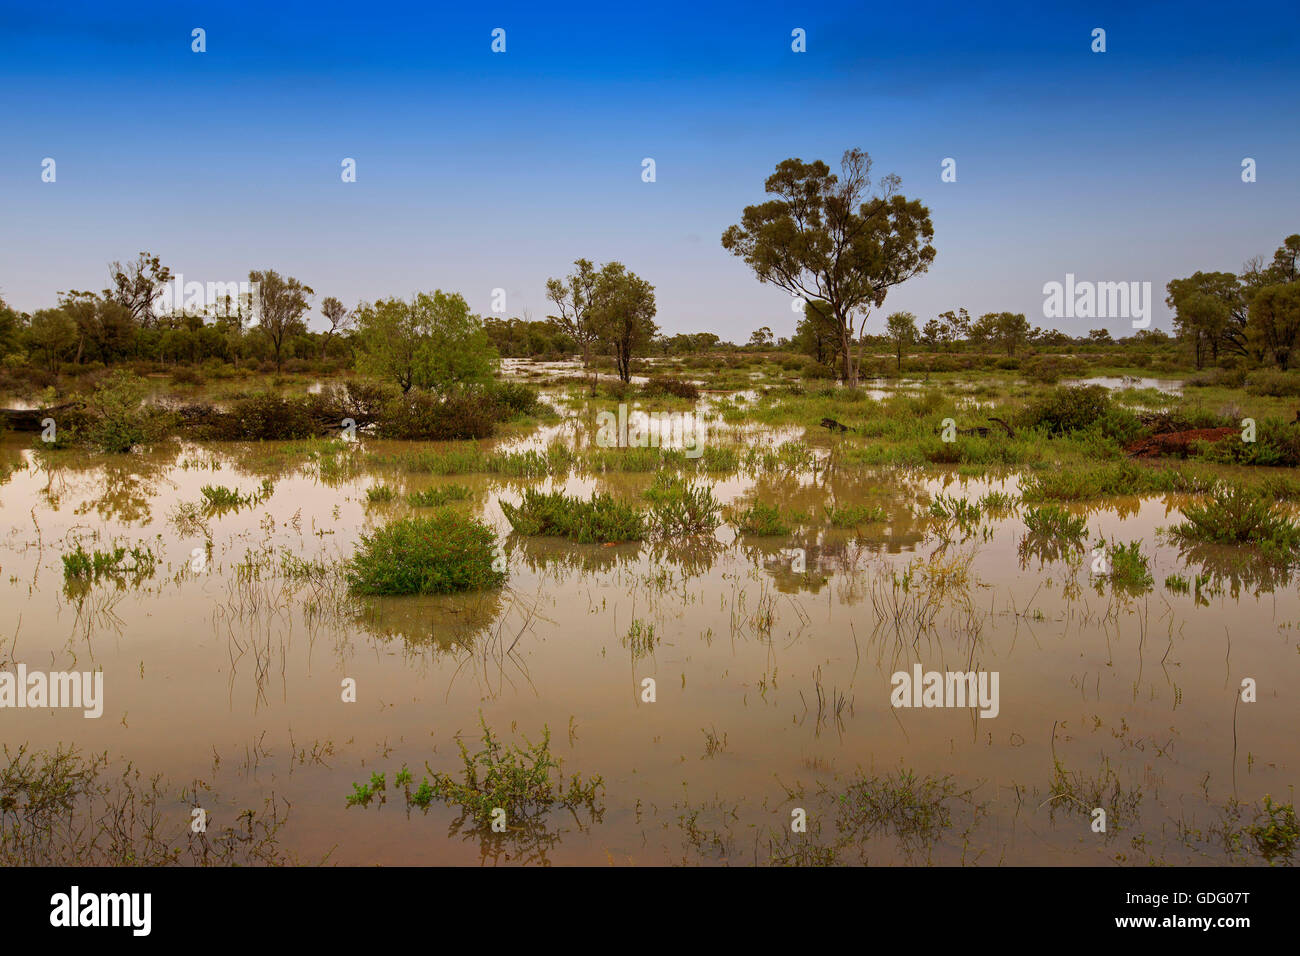 Australian outback landscape after rain, with low trees, shrubs, emerald grasses rising from & reflected in vast expanse of muddy water under blue sky Stock Photo